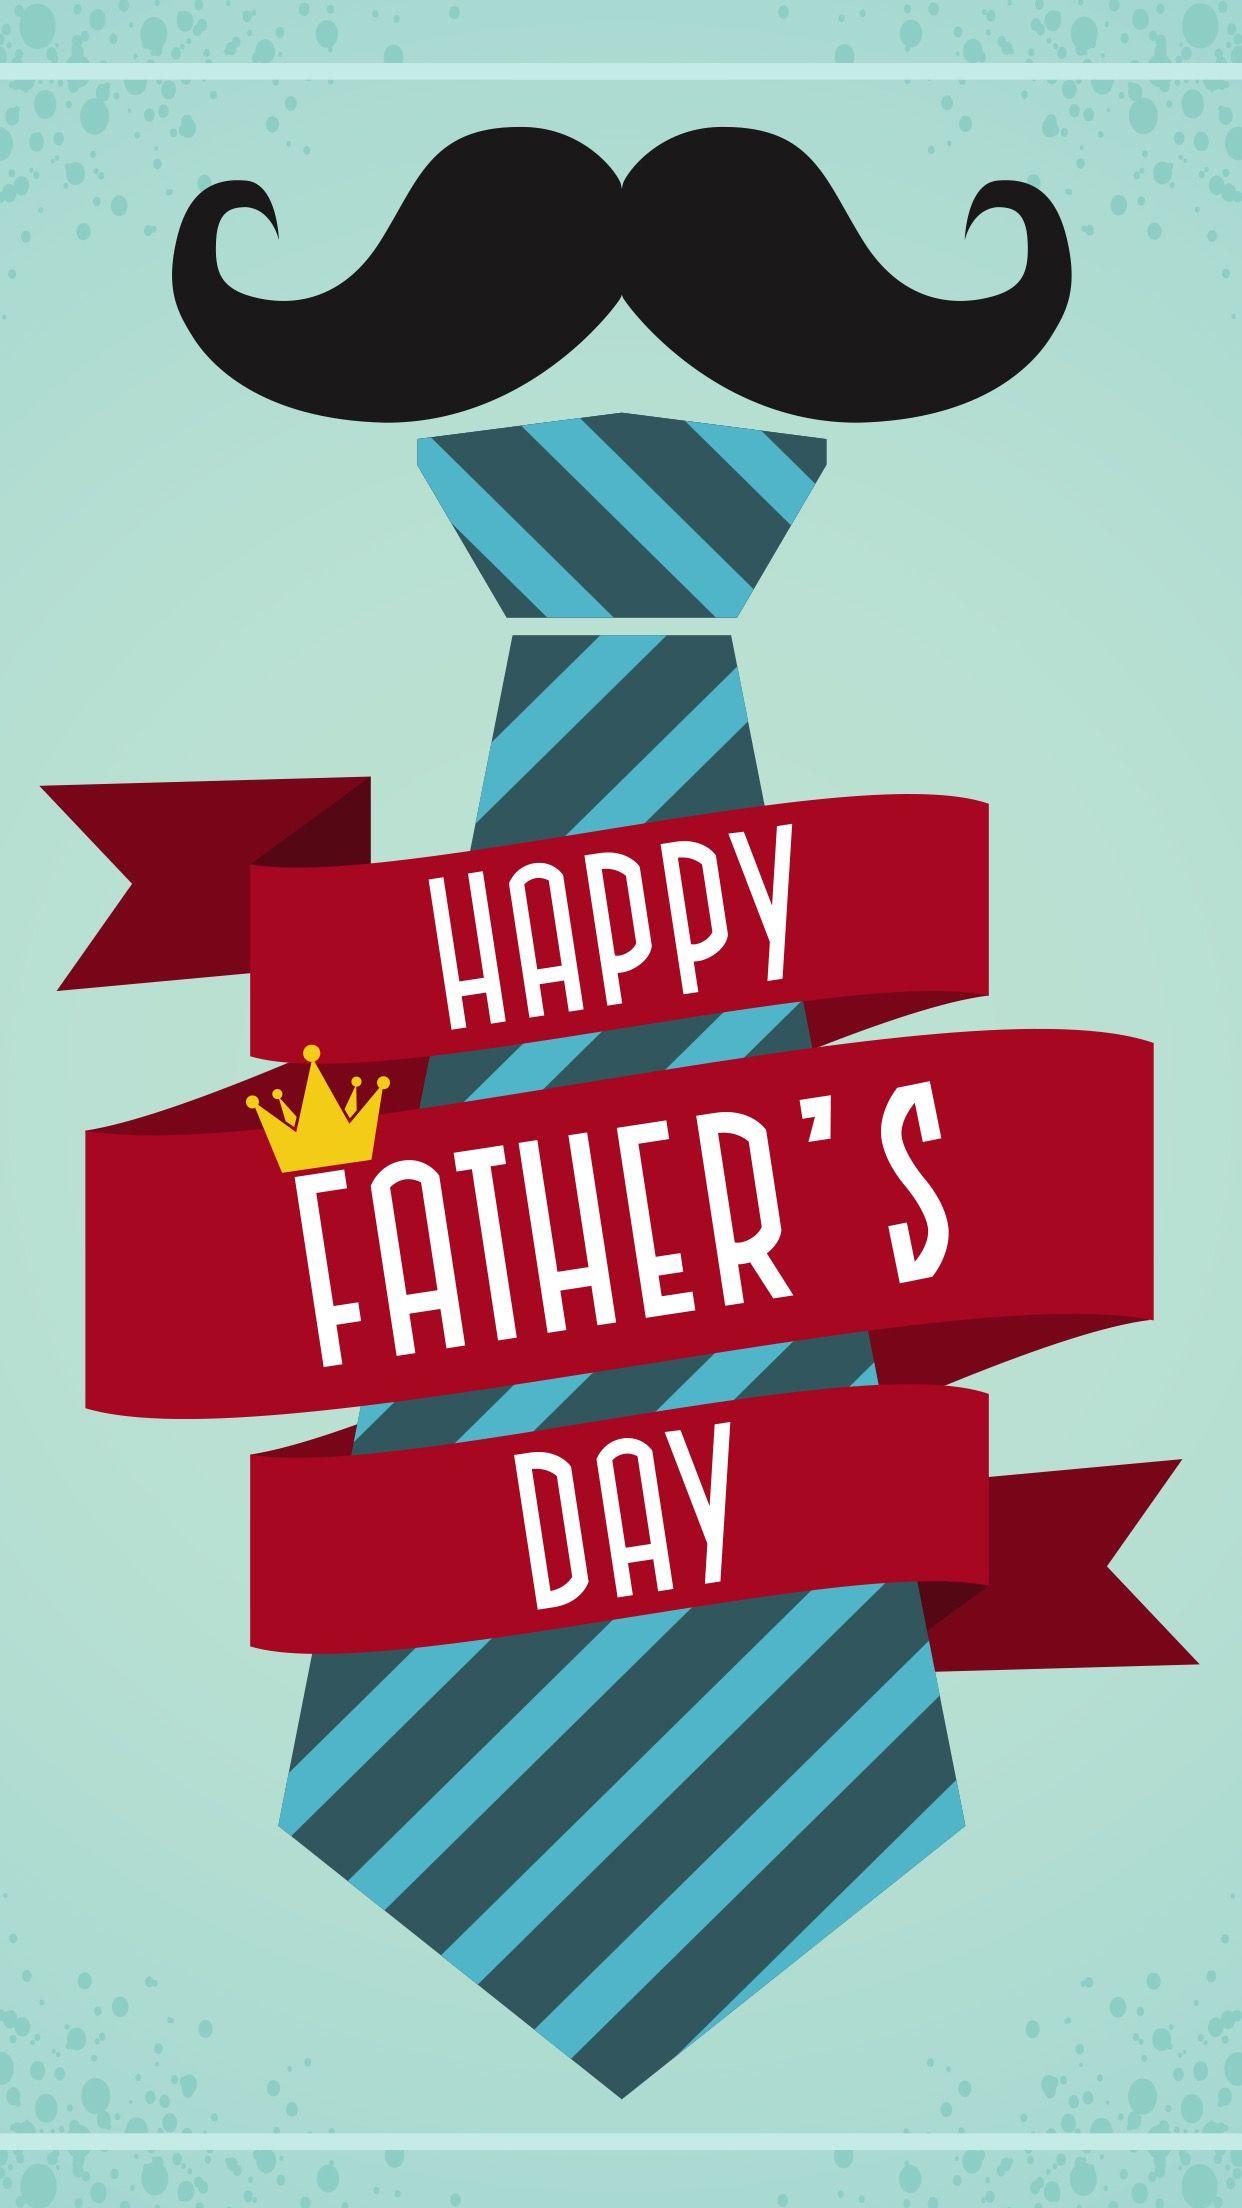 Happy fathers day wallpaper Vector Image  1566896  StockUnlimited